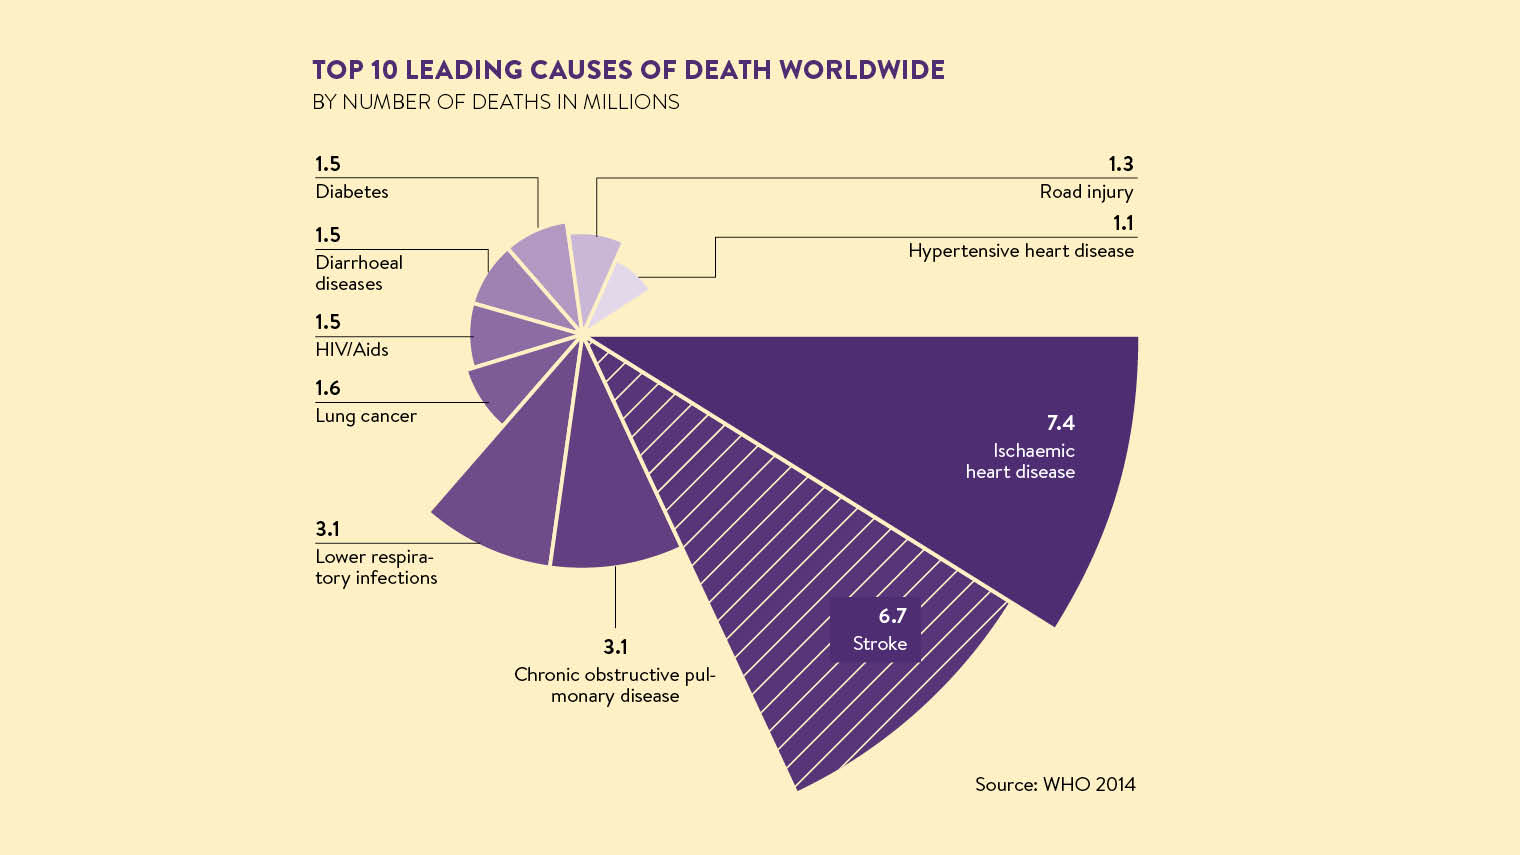 Top 10 leading causes of death worldwide